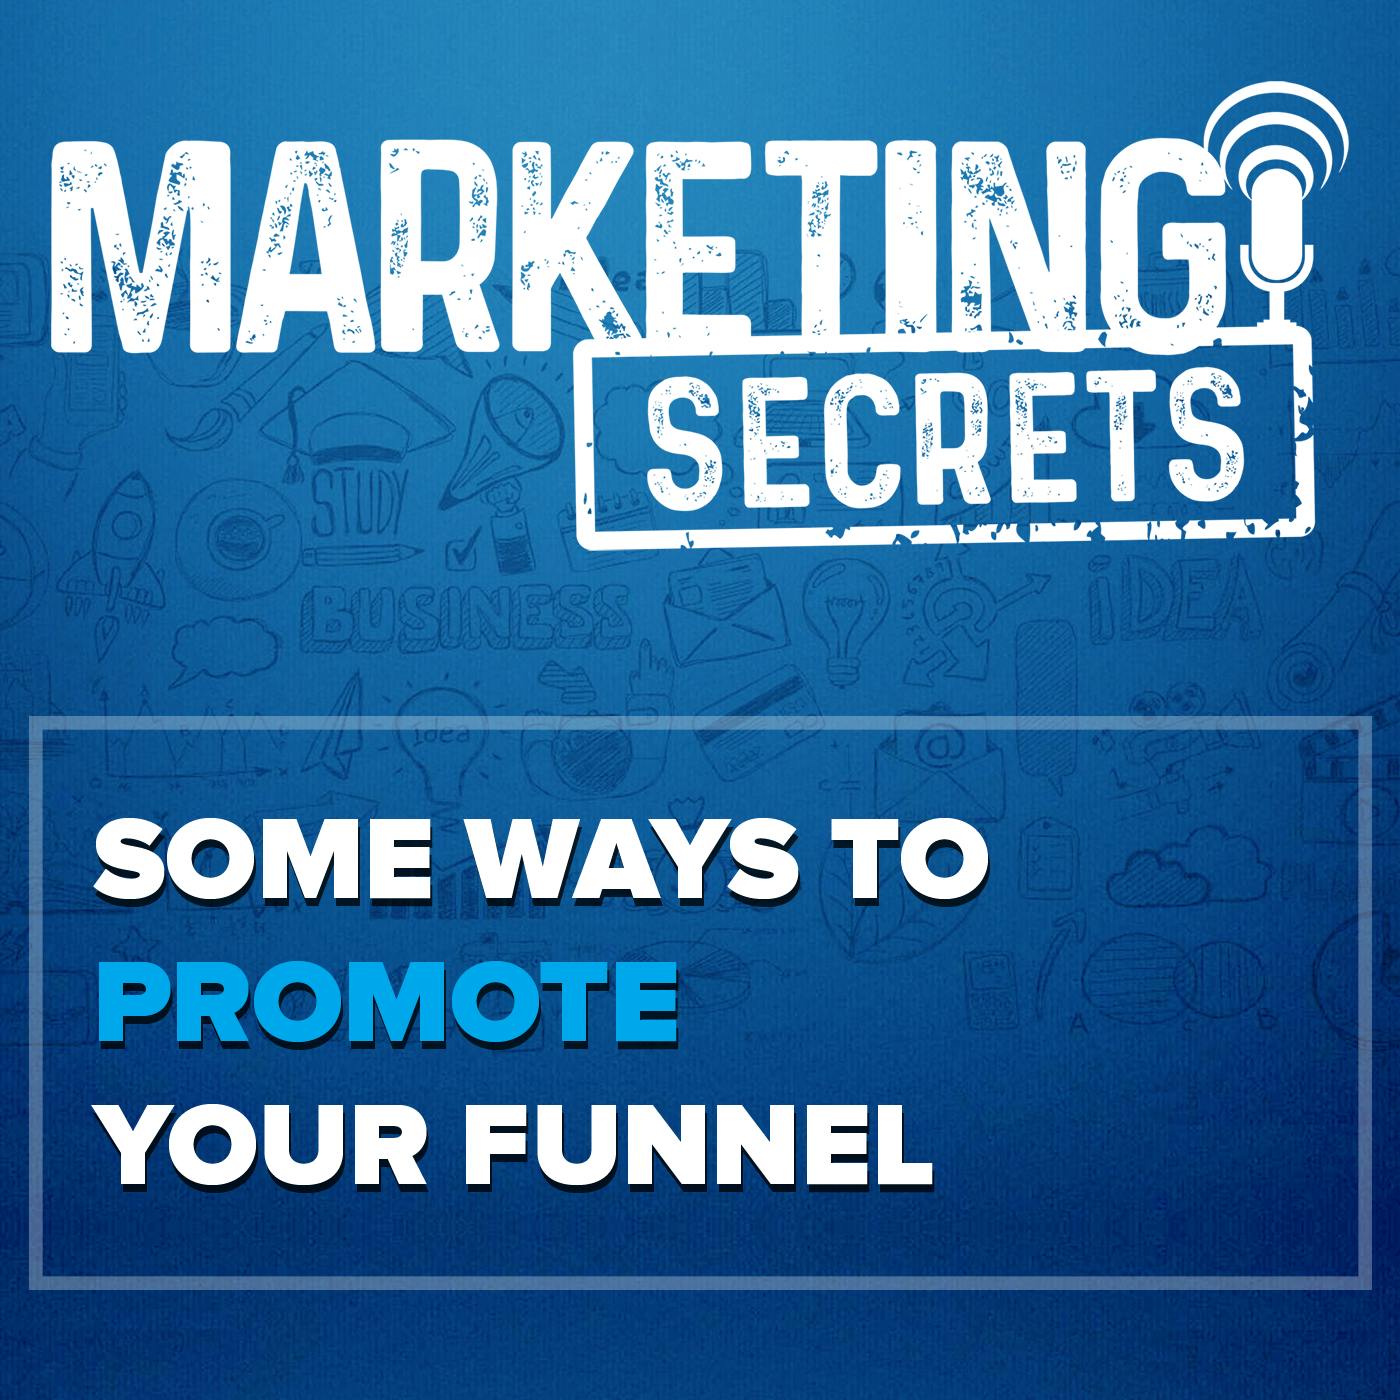 Some Ways To Promote Your Funnel